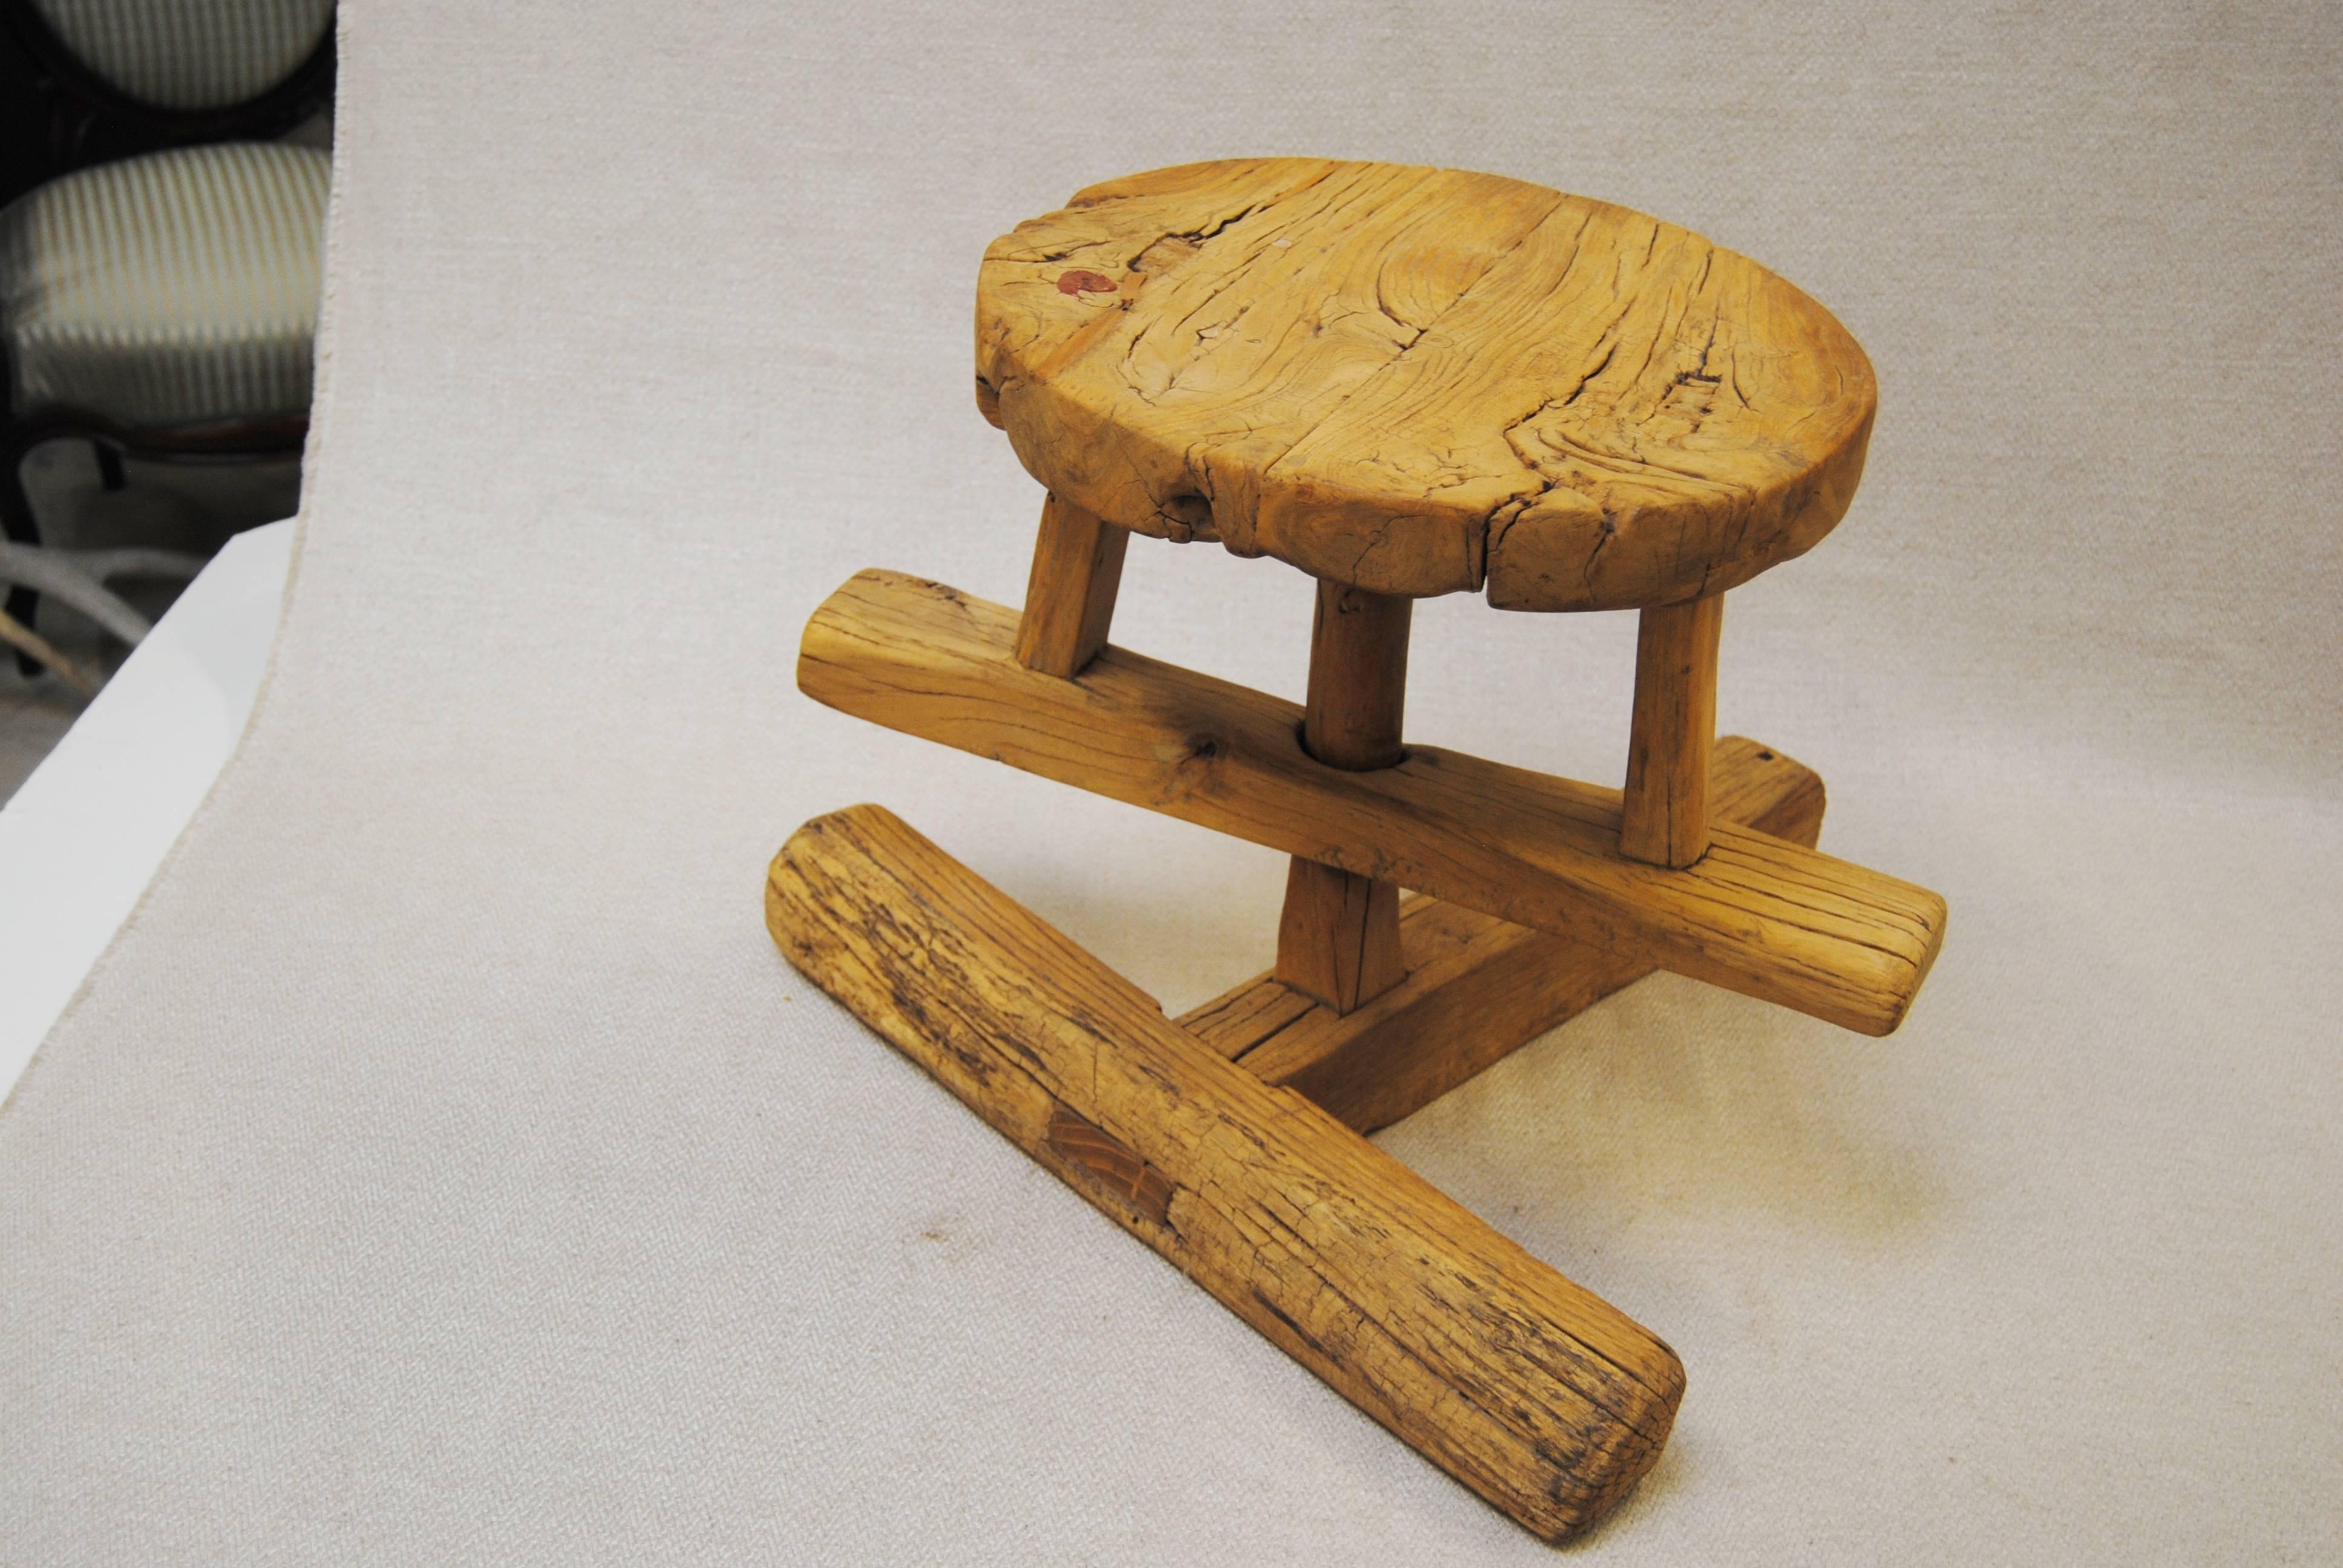 Antique Chinese elmwood potter's stool. Two parts, revolving top fits into the T-base. The old elmwood shows great character with its deep grain. A great piece of folk art.